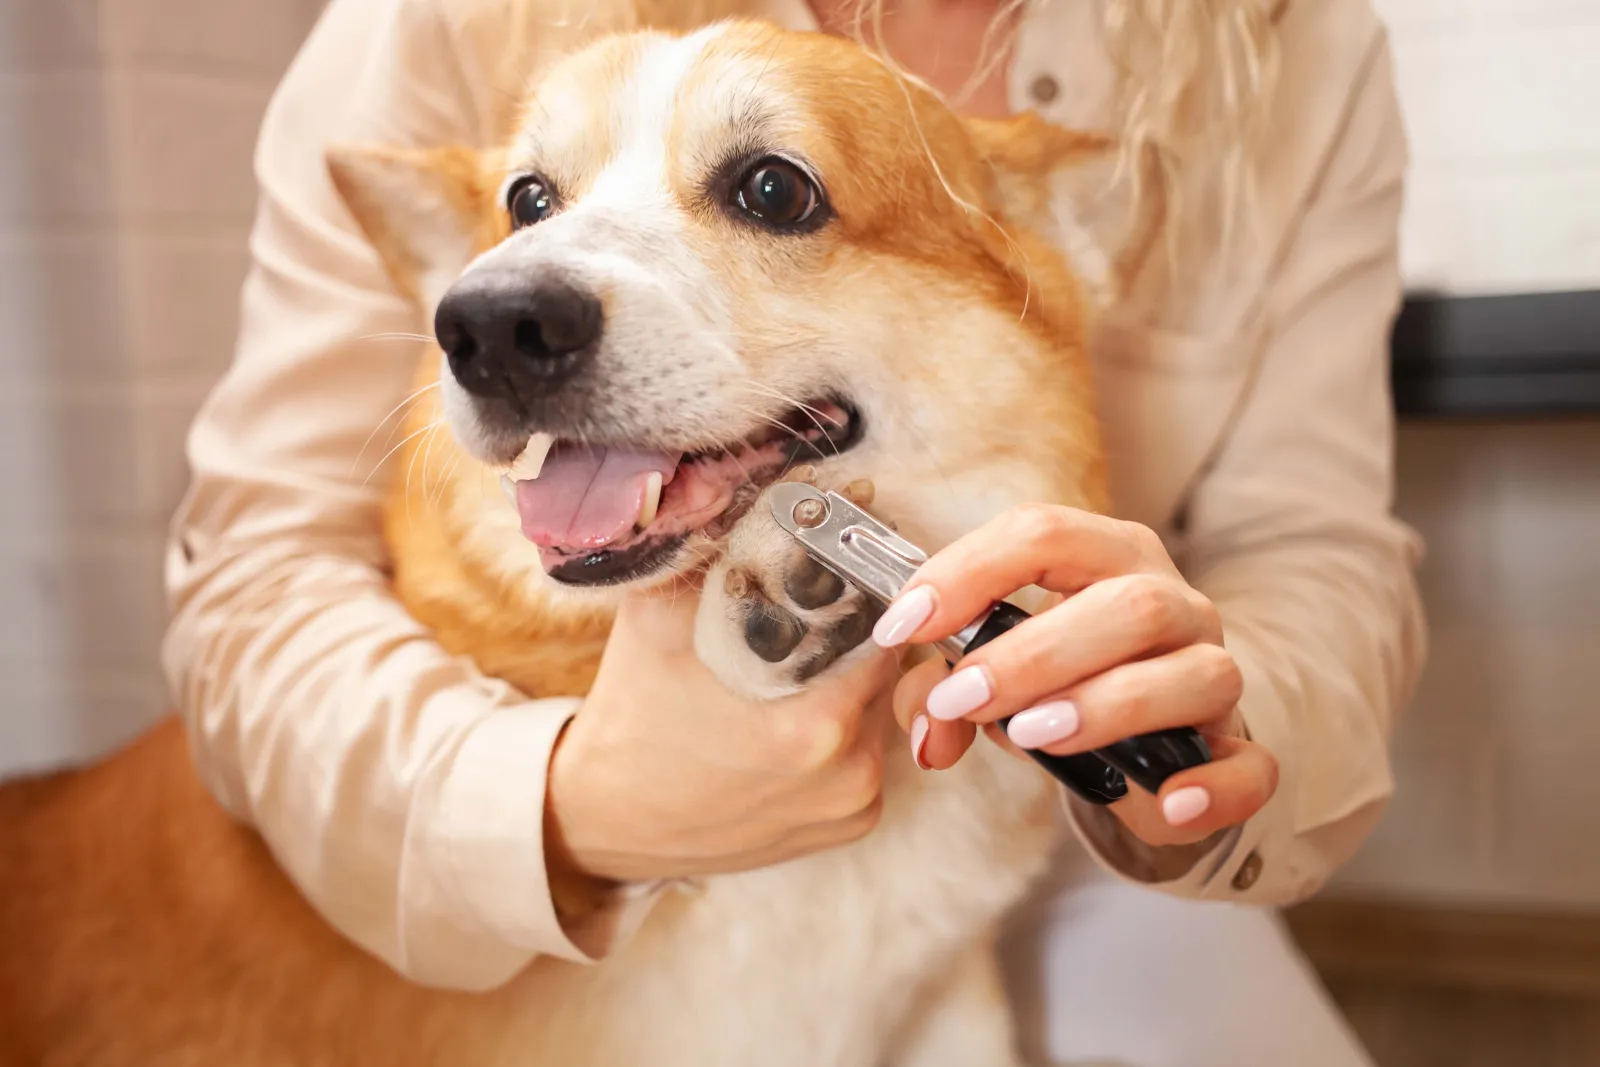 Trim Your Dog's Nails